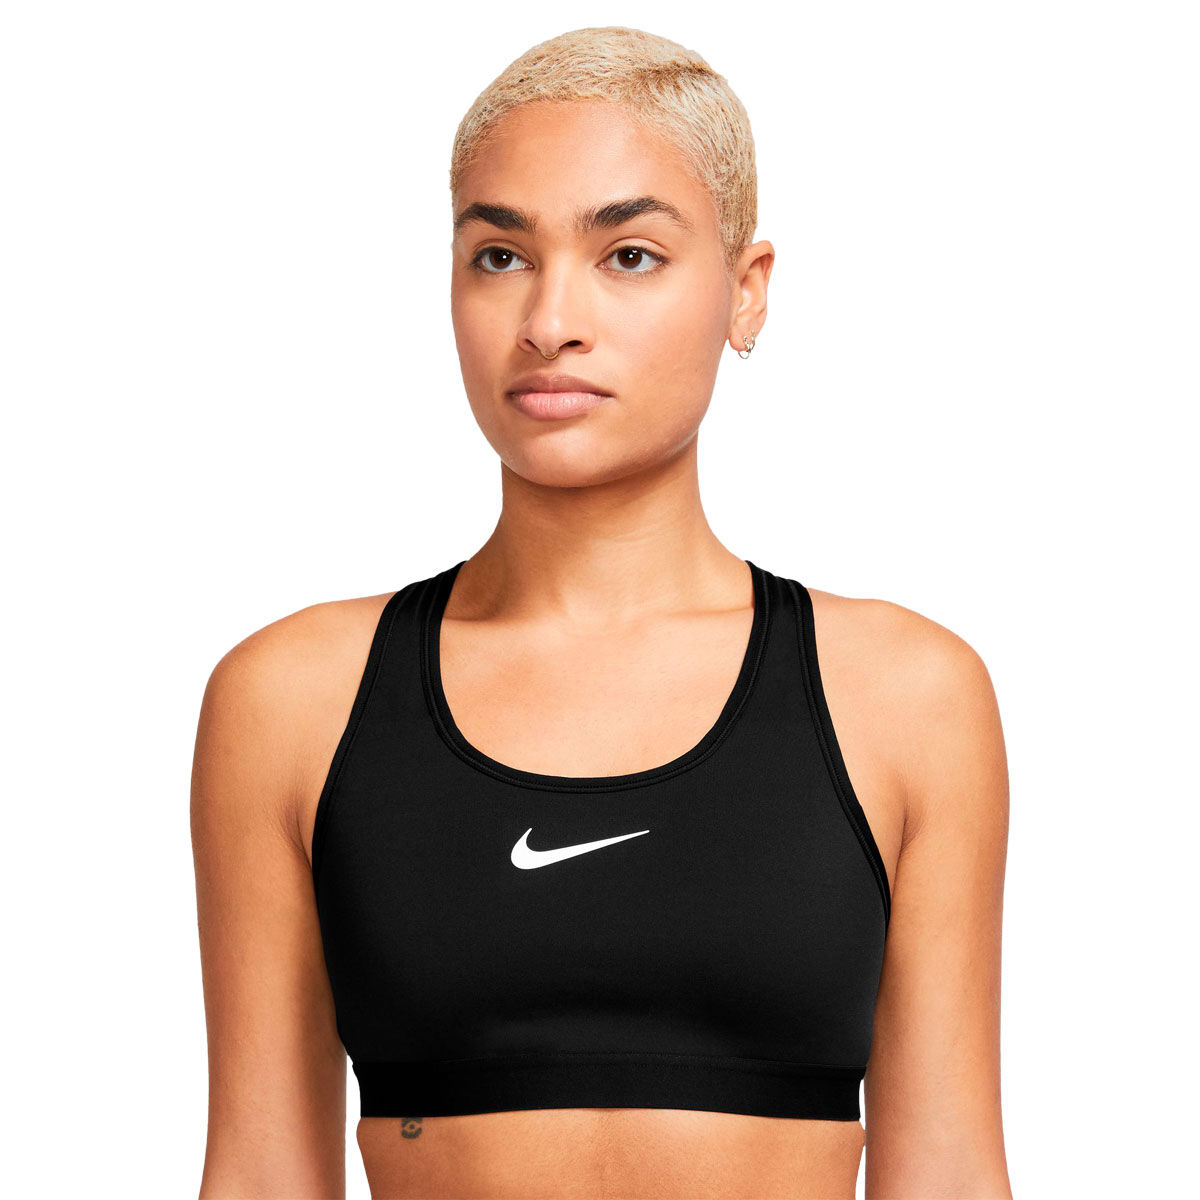 Nike Swoosh Women's High-Support Non-Padded Adjustable Sports Bra.